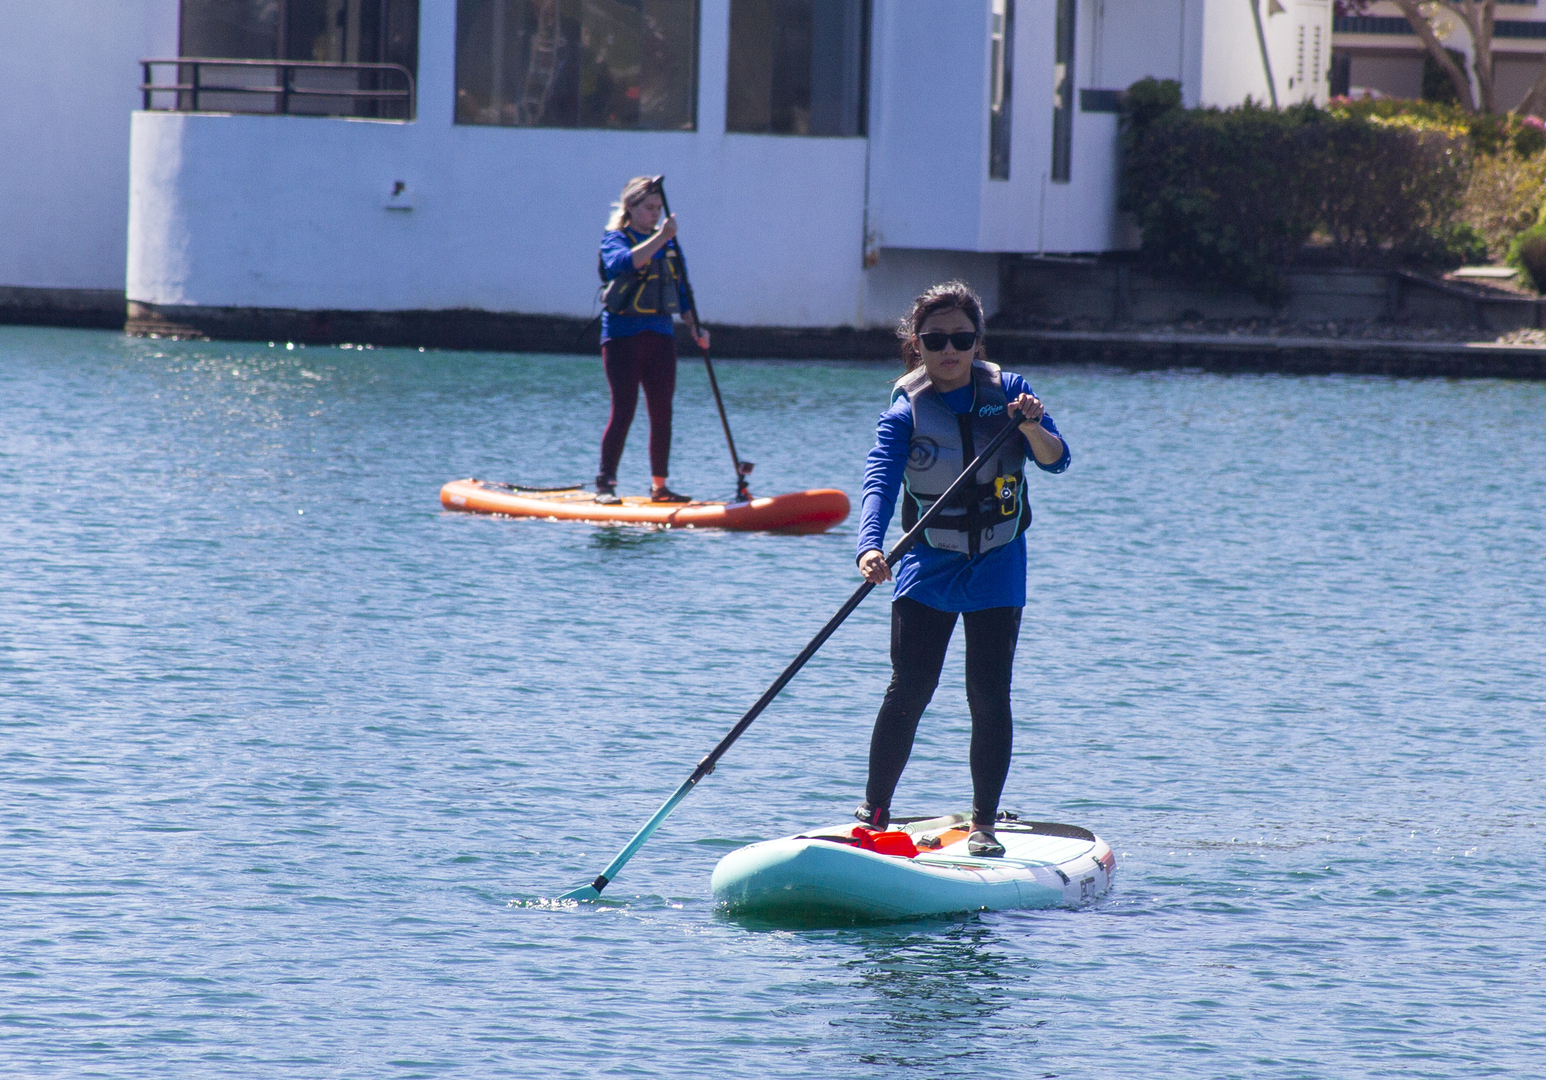 Kayaking and Stand-up Paddleboarding for High School Students, Foster City, California, United States